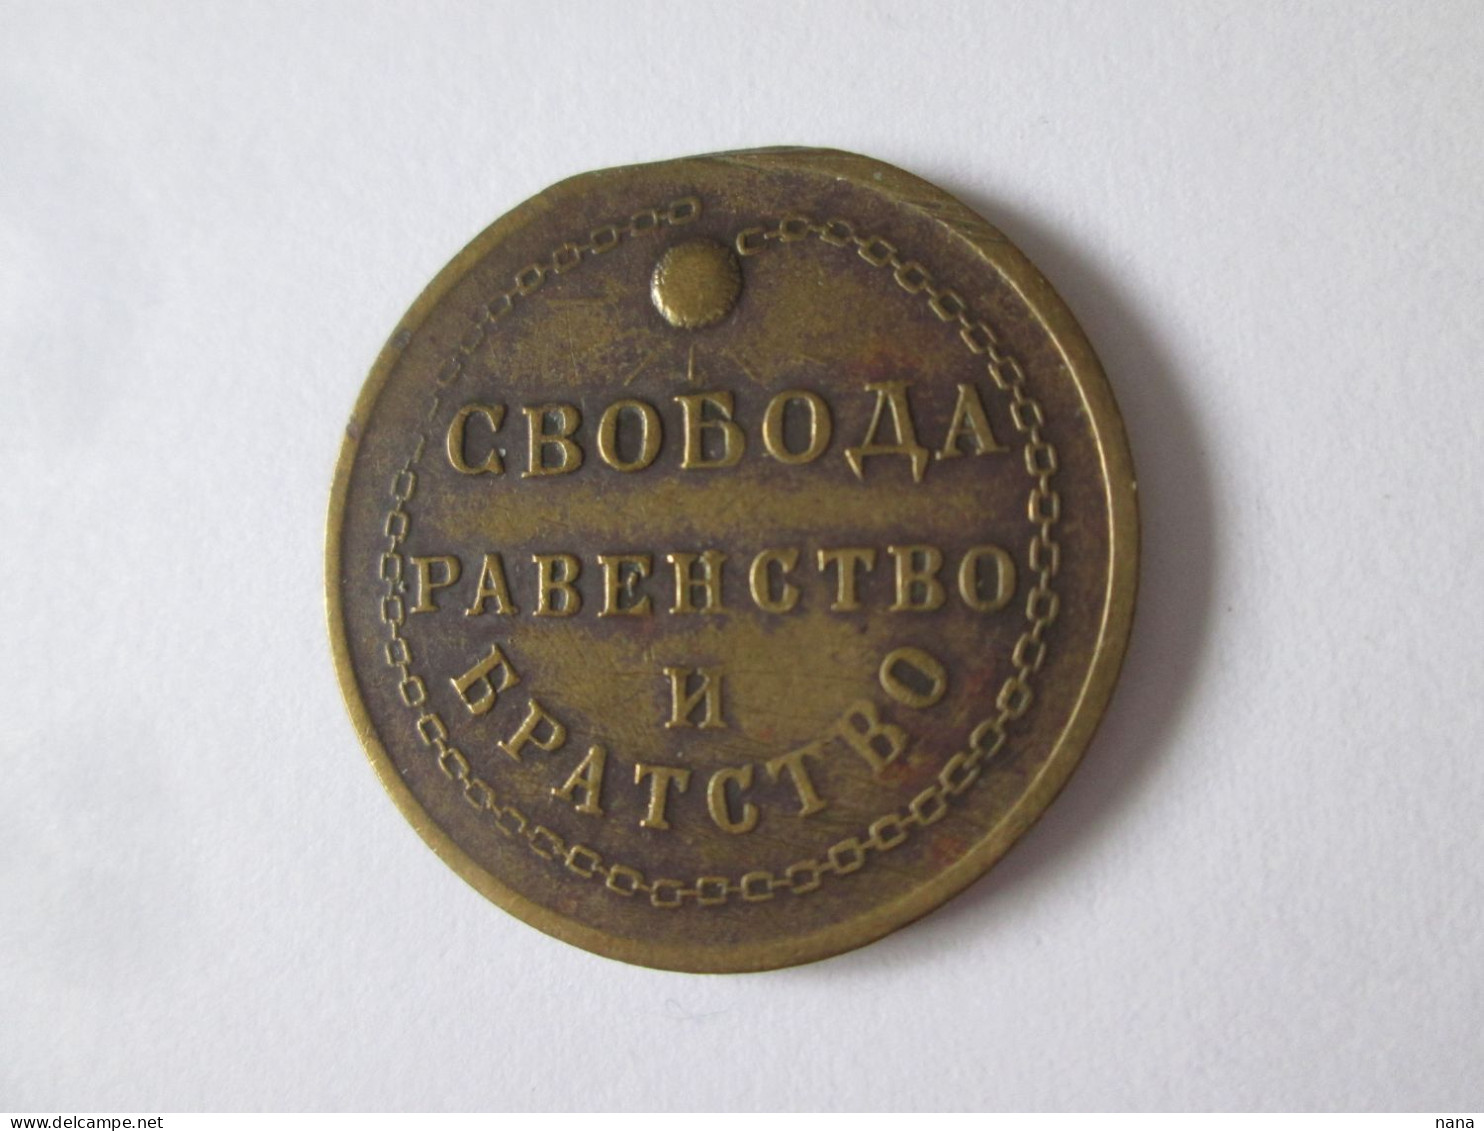 Rare! 1917 Russie Medaille Provis.du Gouvern.Kerensky/1917 Russia Provisional Kerensky Government Medal - Russia